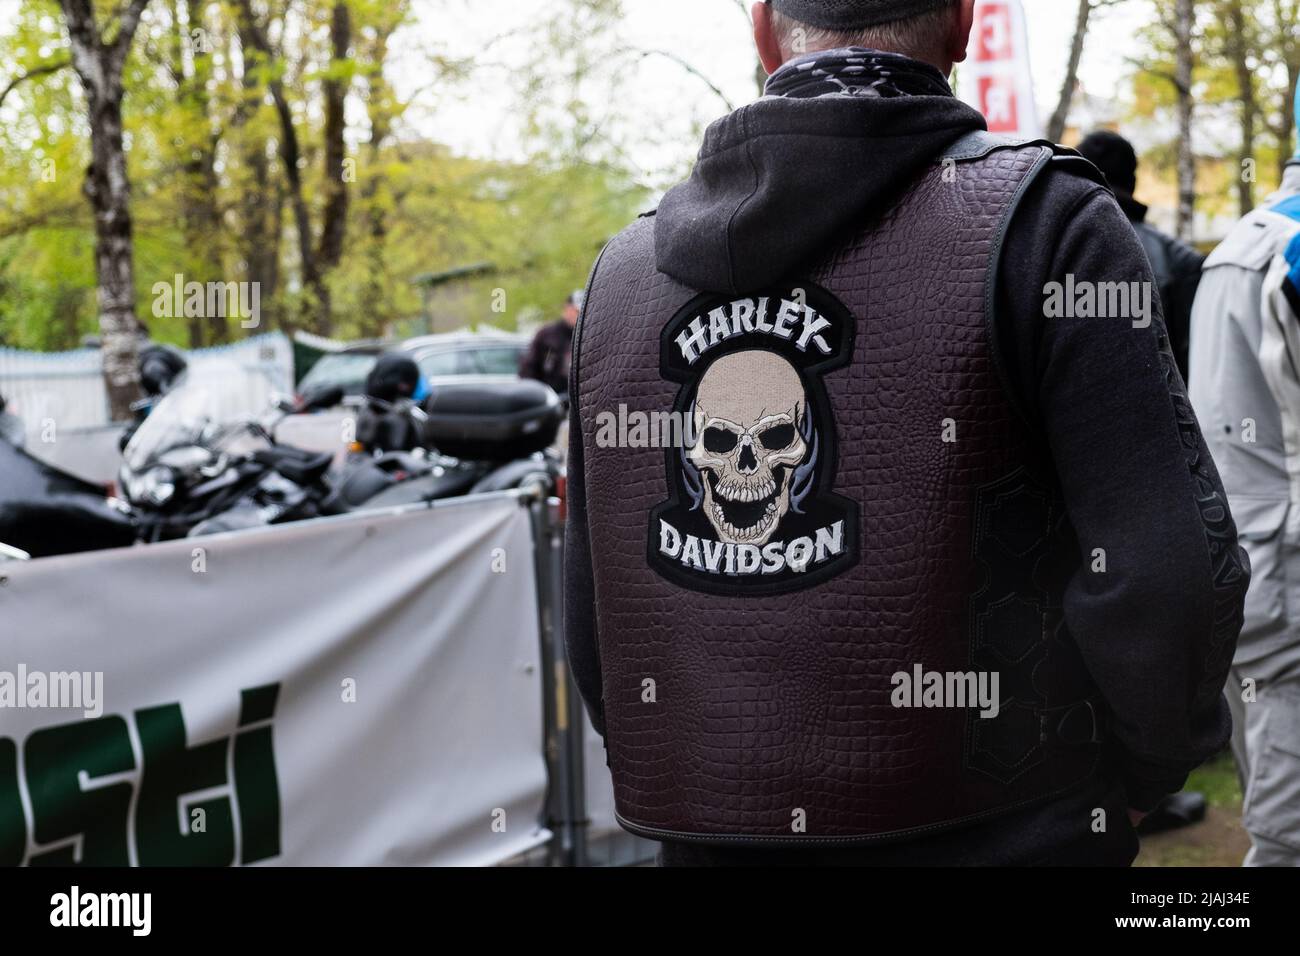 Estonian Motorcycle Season Opening. Man with Harley Davidson leather vest. Motorcyclist gathering parade or rally. Stock Photo